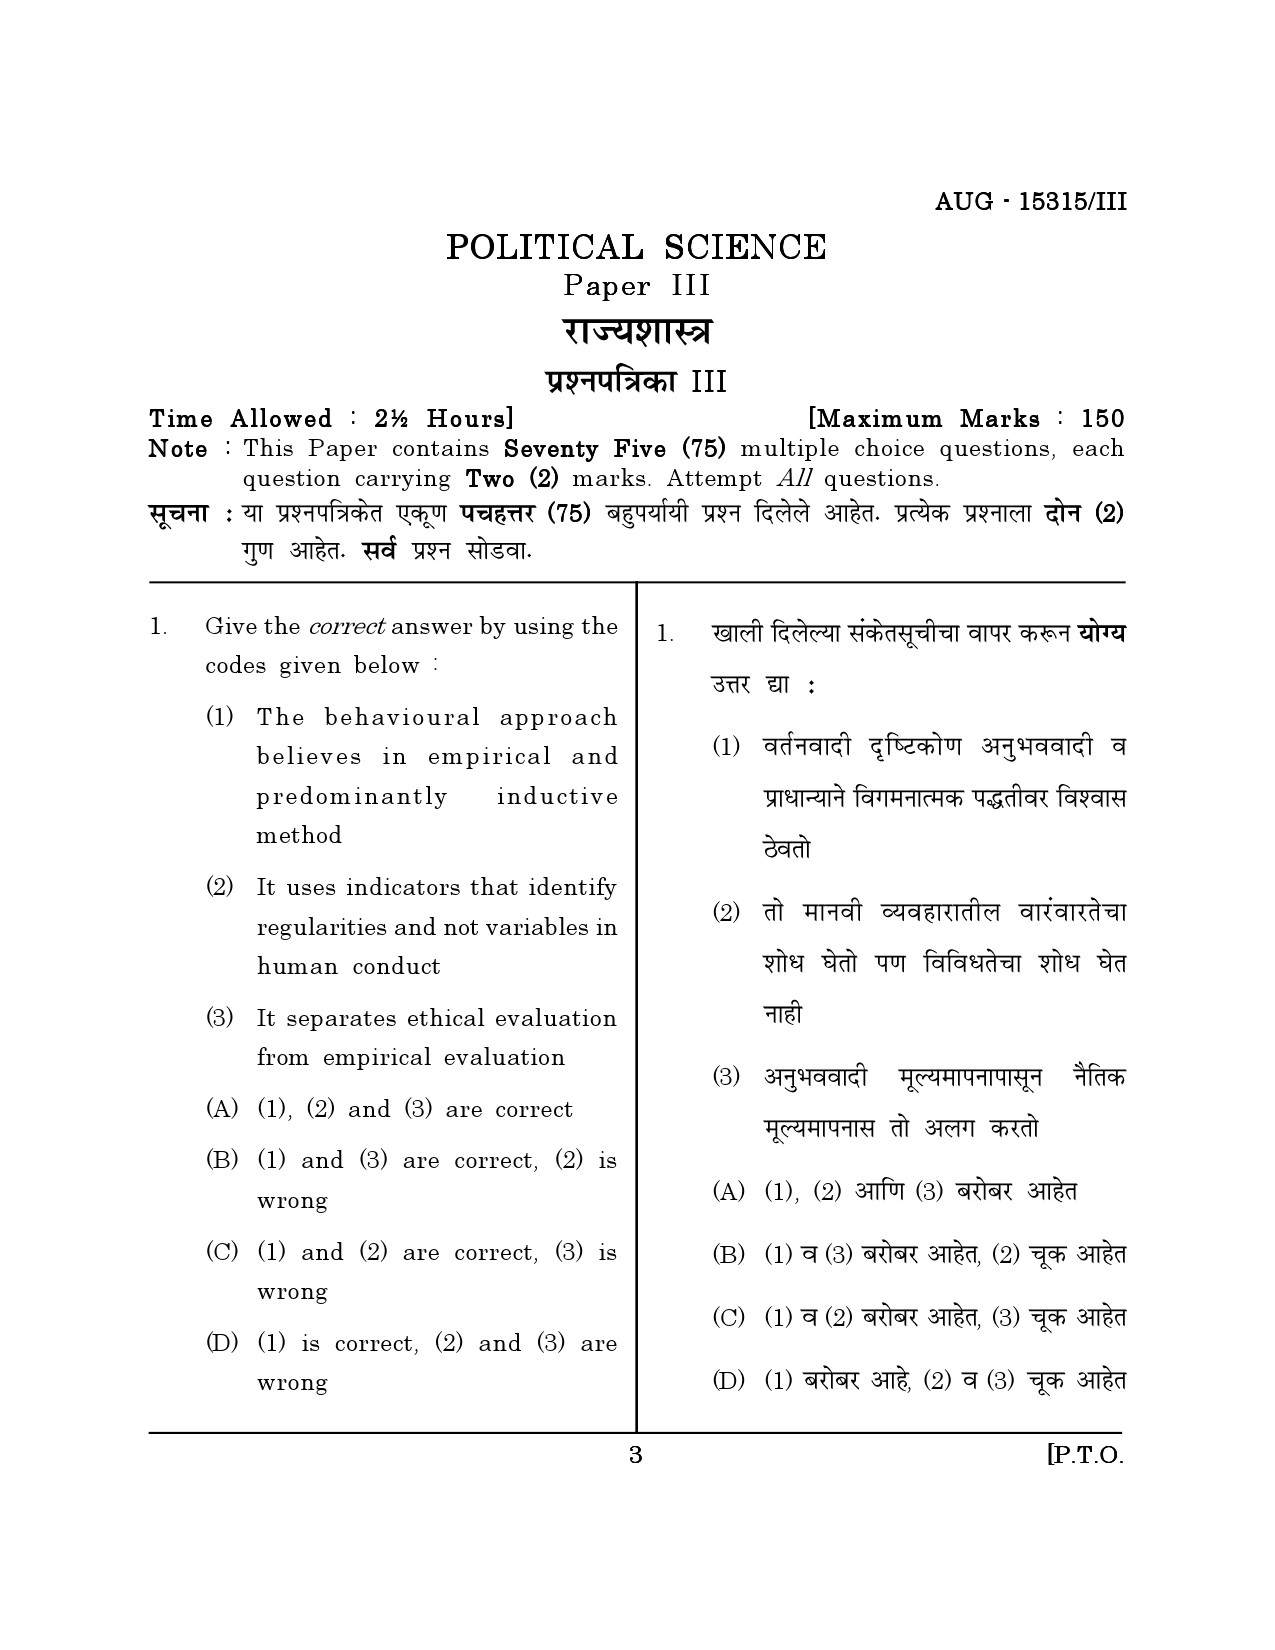 Maharashtra SET Political Science Question Paper III August 2015 2